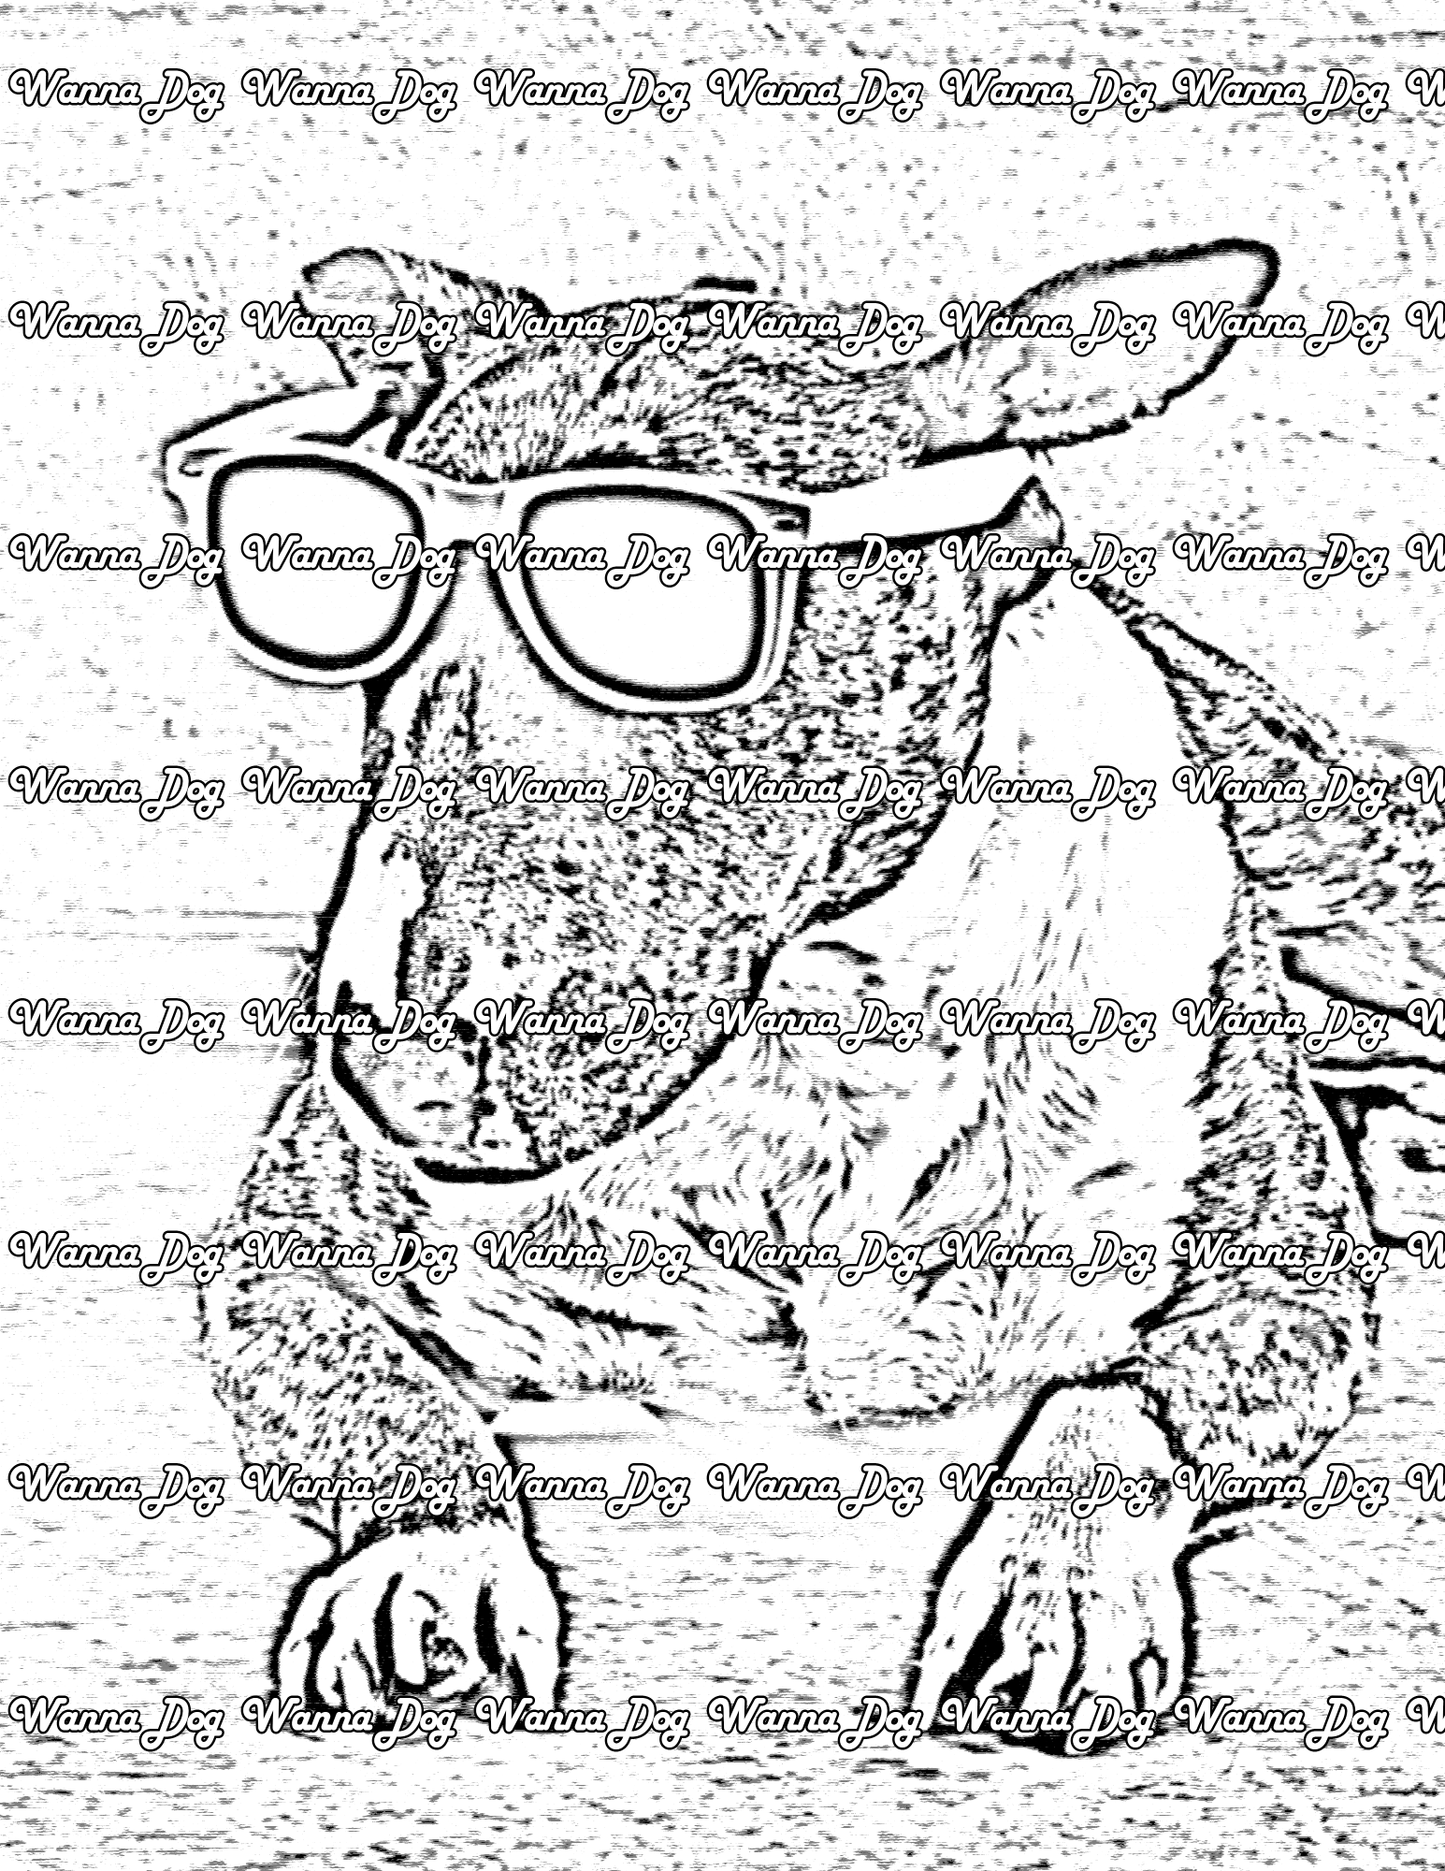 Bull Terrier Coloring Page of a Bull Terrier wearing sunglasses